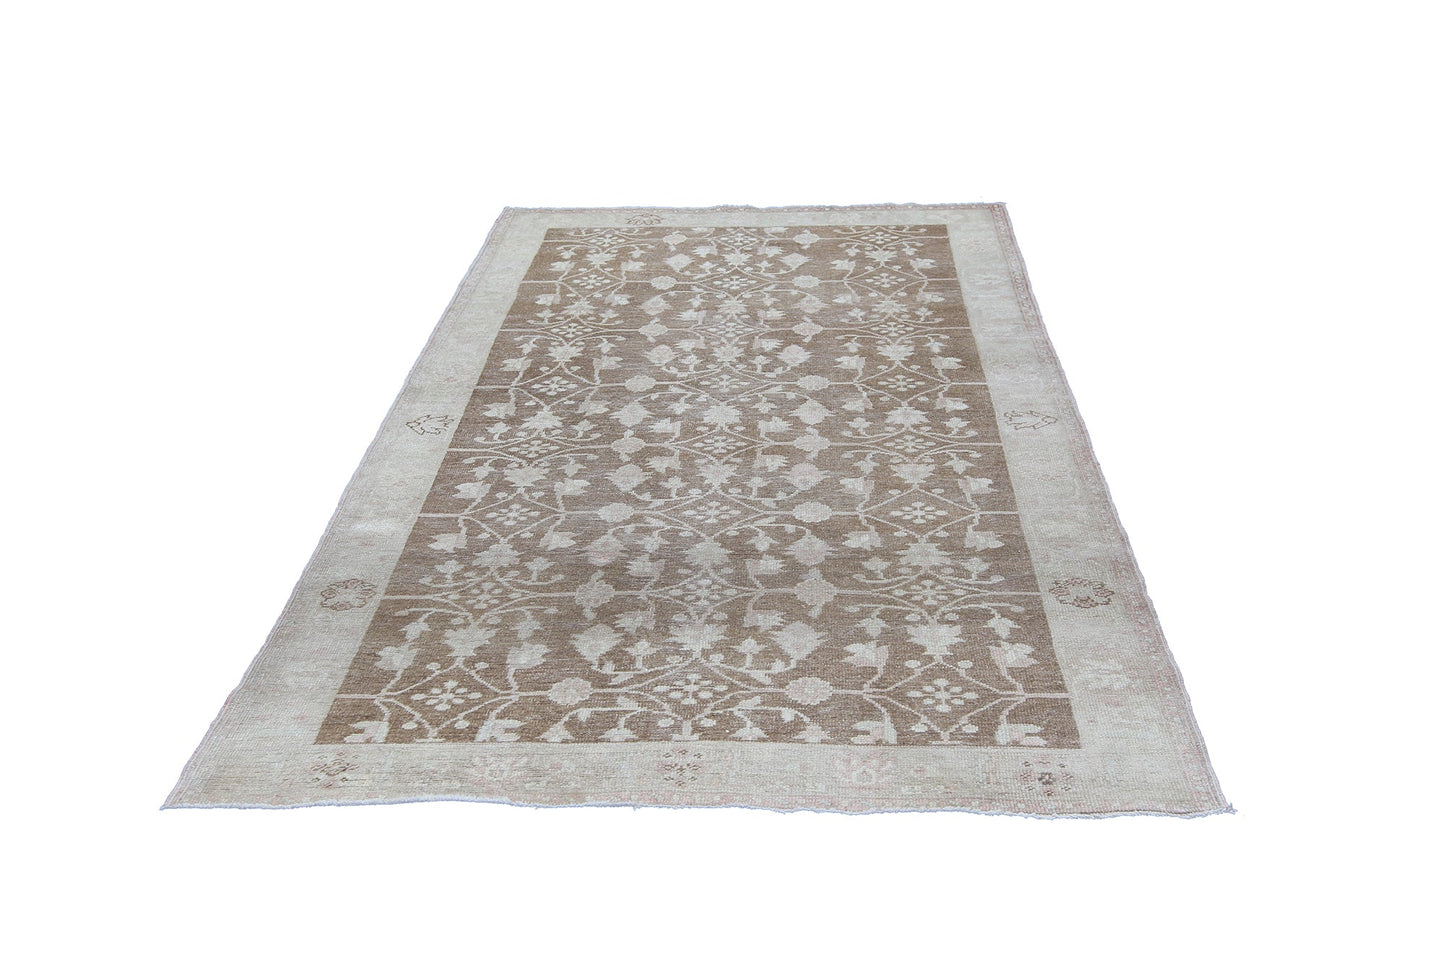 Turkish Handmade With a classic Design Wool Runner Rug product image #27556506960042